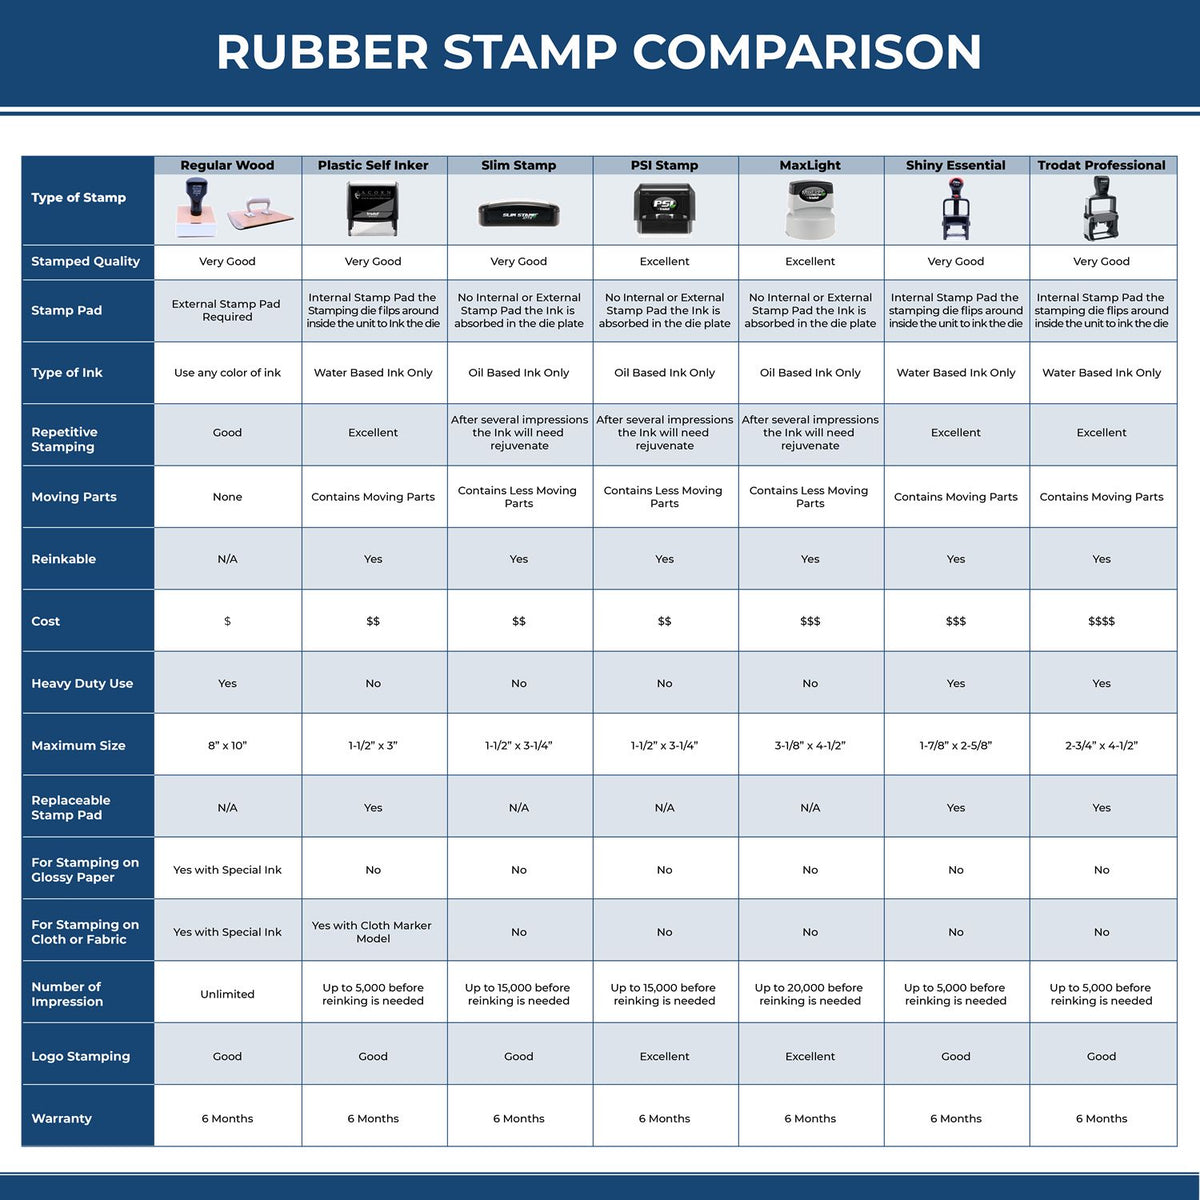 A comparison chart for the different types of mount models available for the Premium MaxLight Pre-Inked New Hampshire Engineering Stamp.